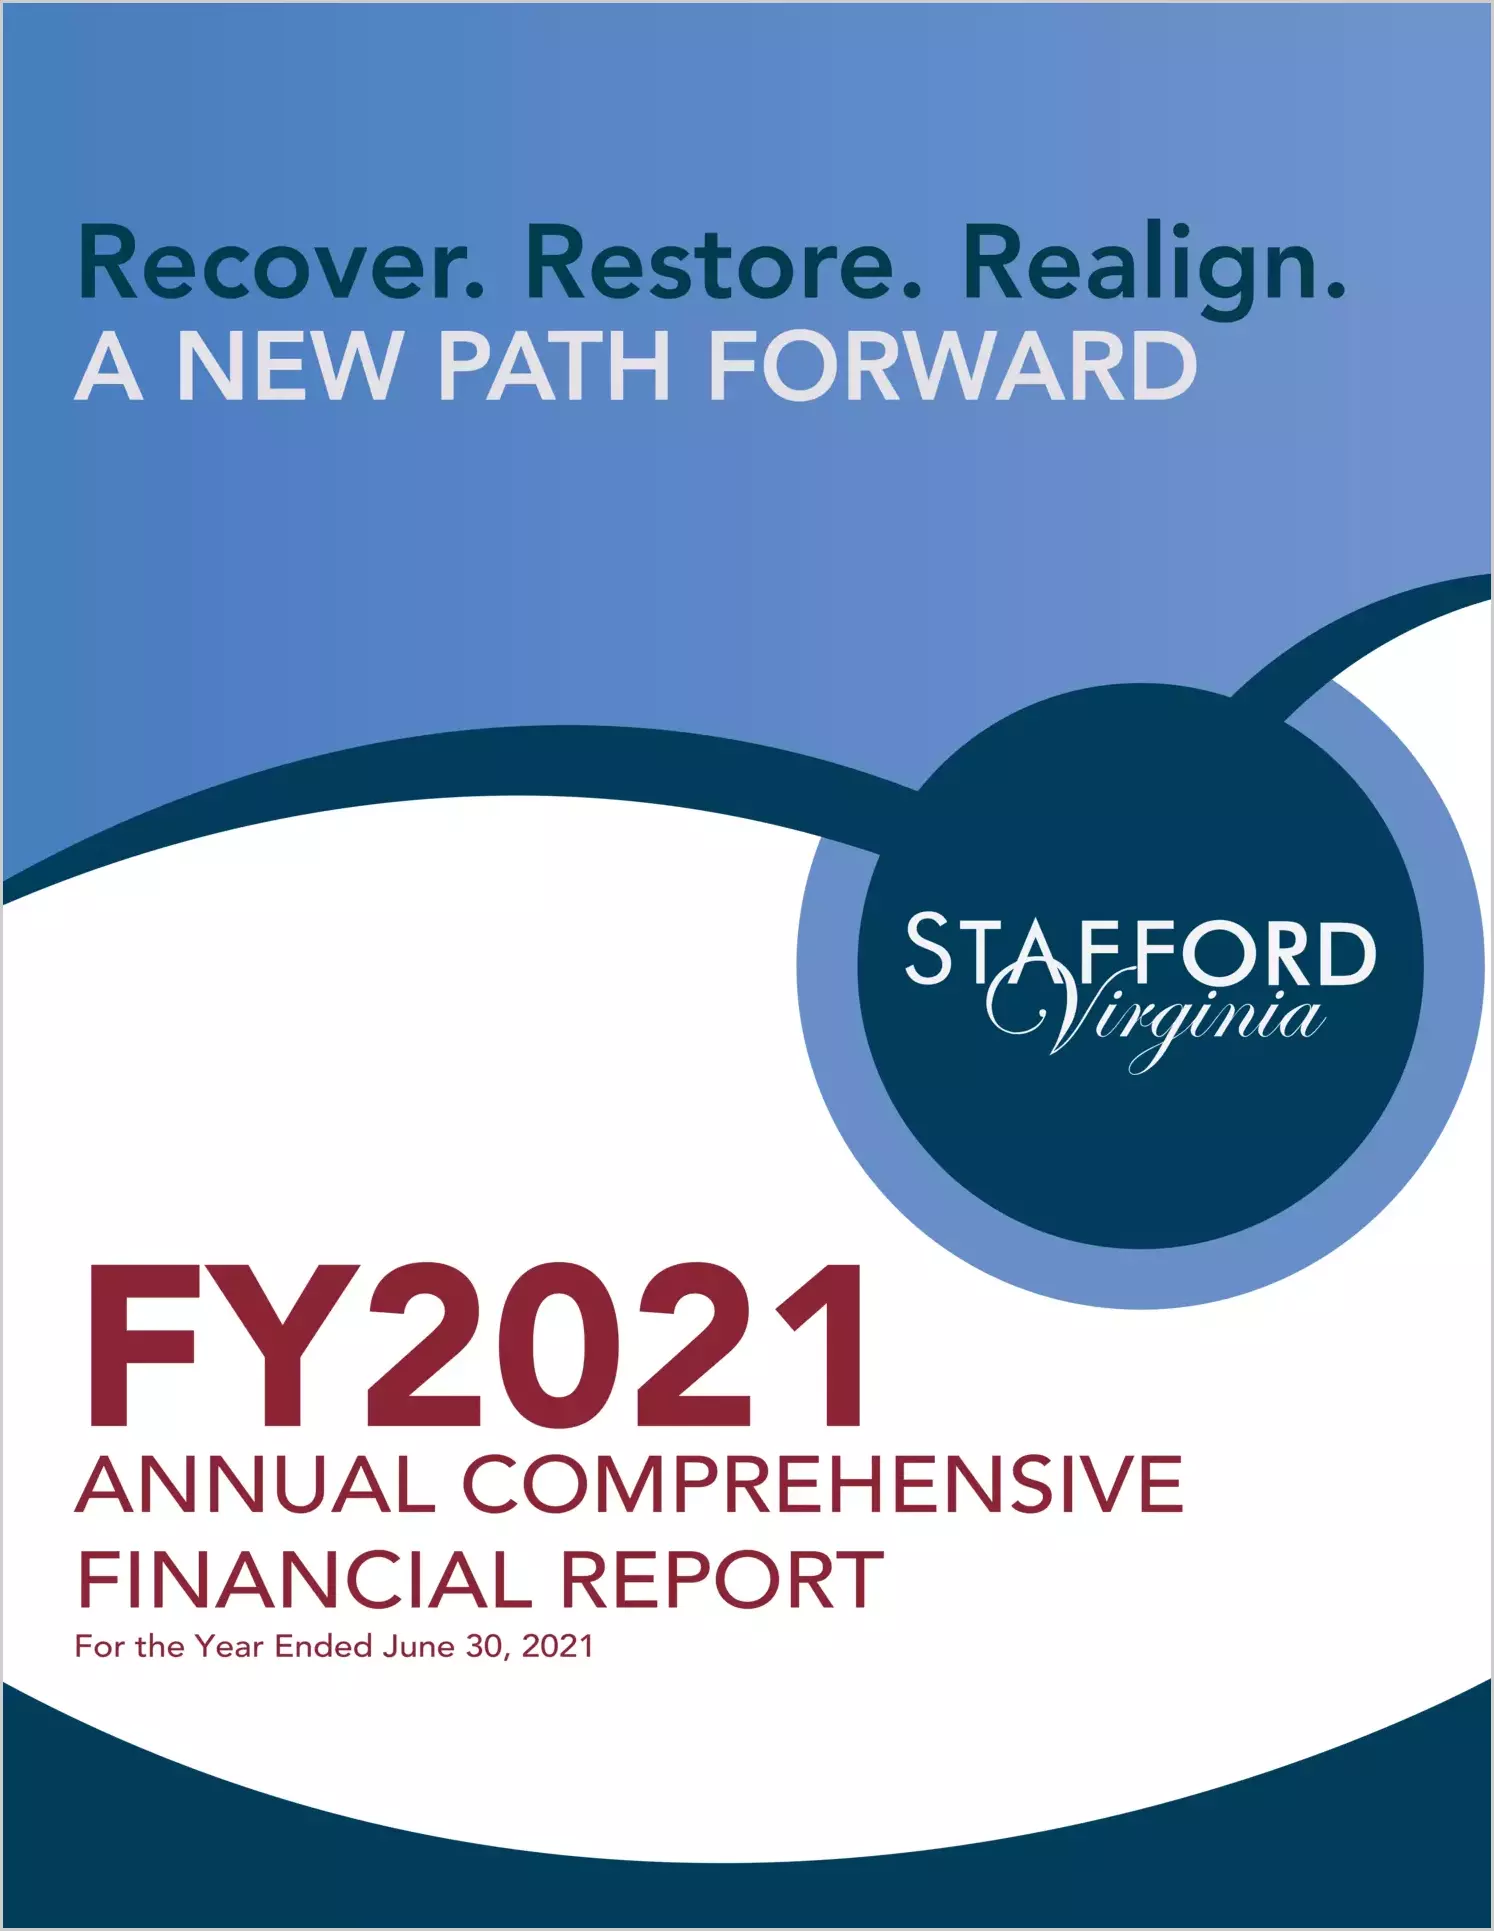 2021 Annual Financial Report for County of Stafford